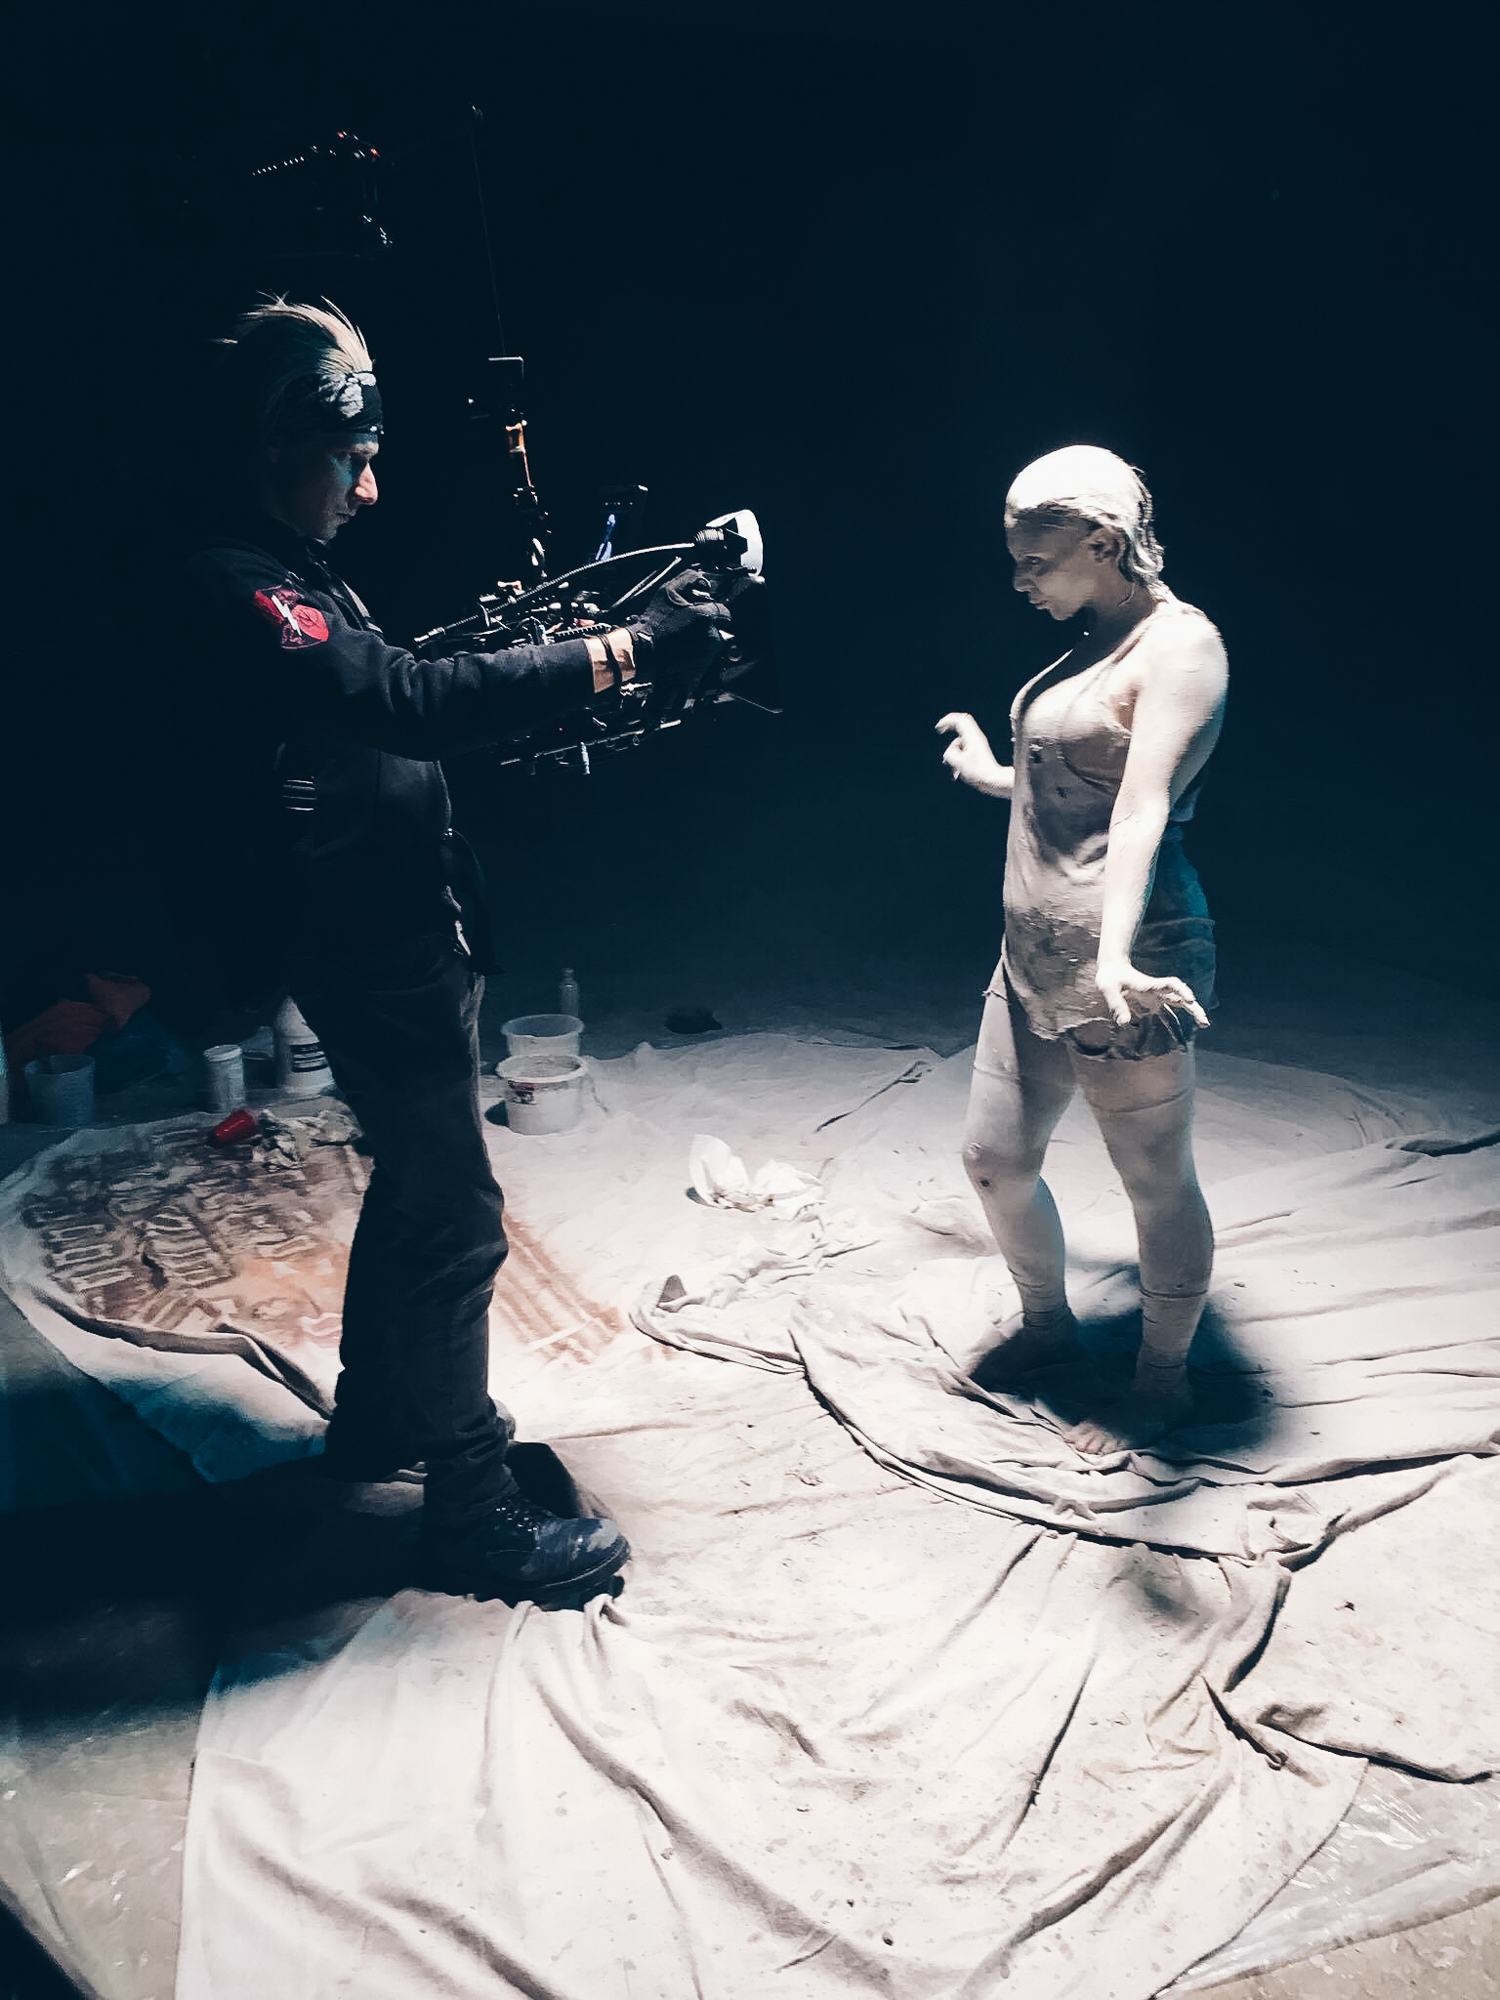 Man uses easyrig attached to camera to record a woman covered in white mud in dark room for a music video.